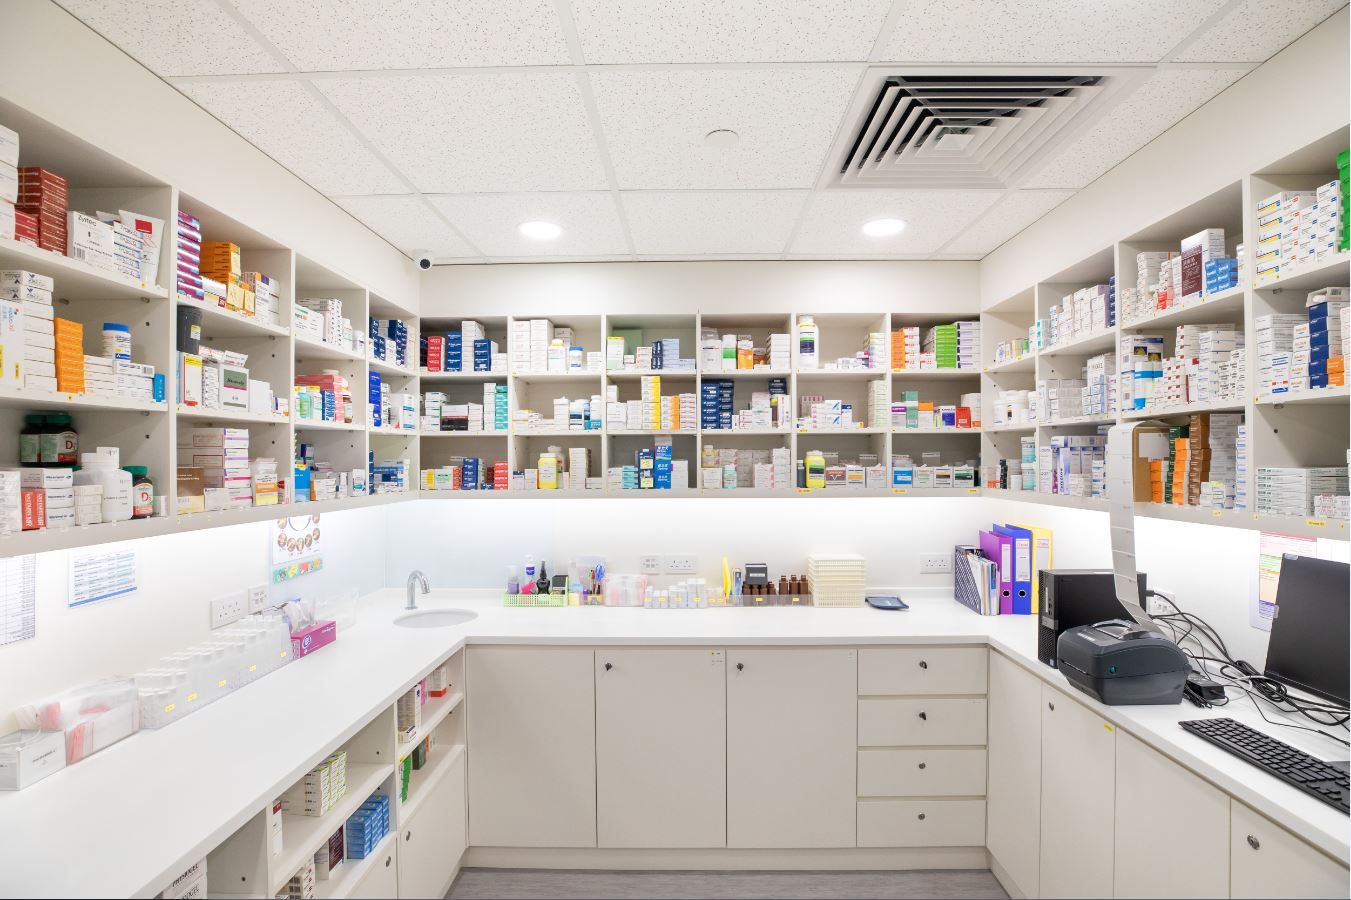 Dispensary room with shelves and cabinets of medicines